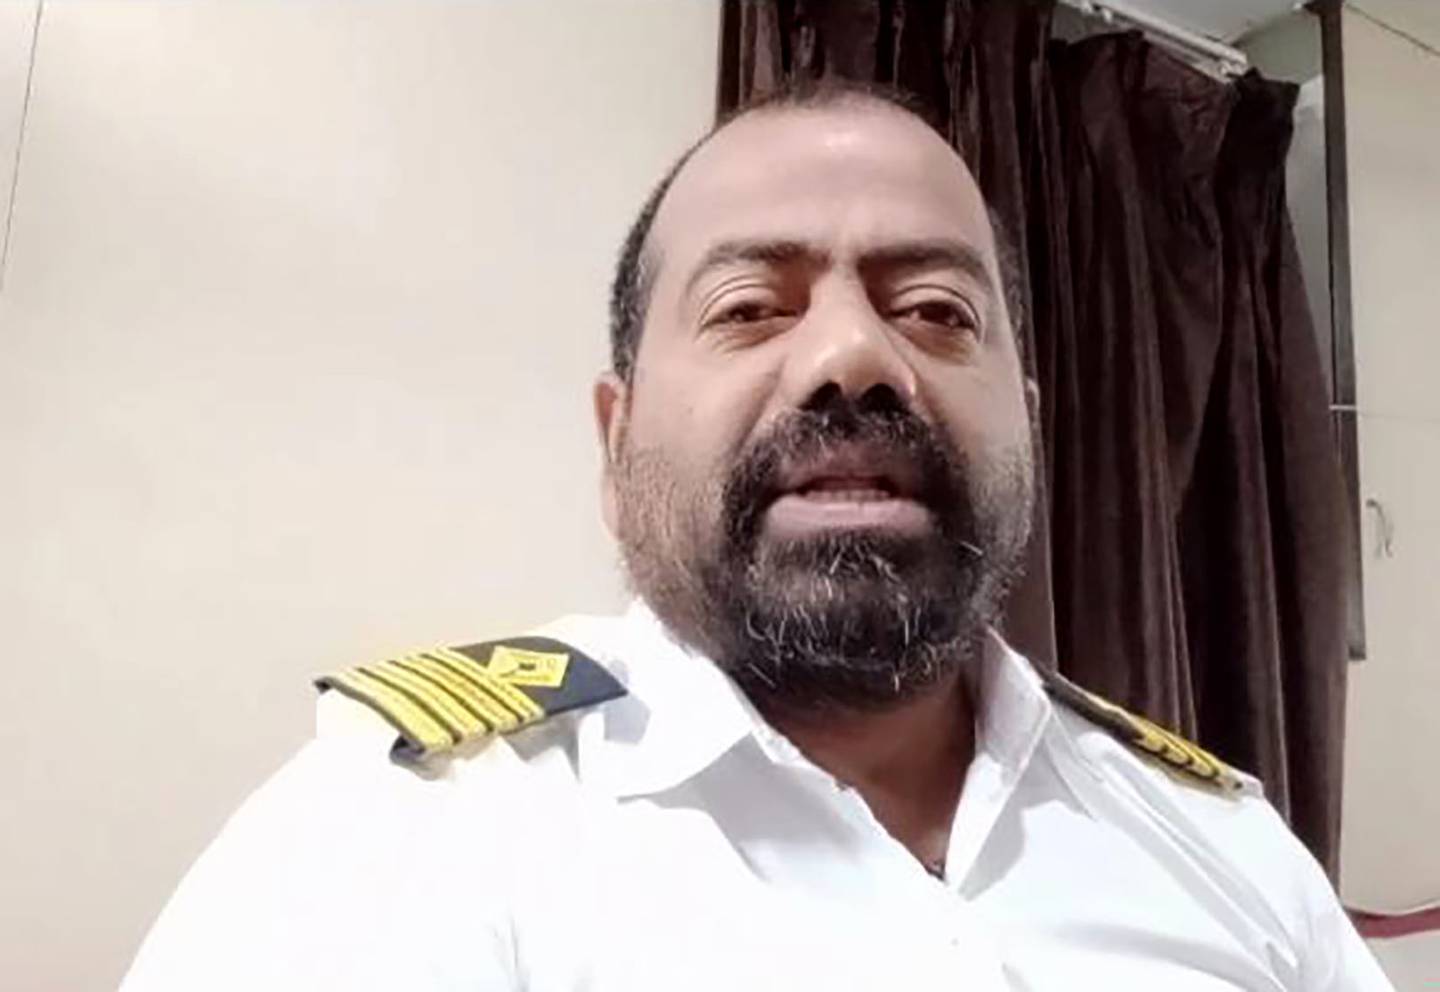 Captain Ayyappan Swaminathan, a commercial sailor from India, has gone back to sea after recovering from an 18-month abandonment anchored off the UAE in 2019.